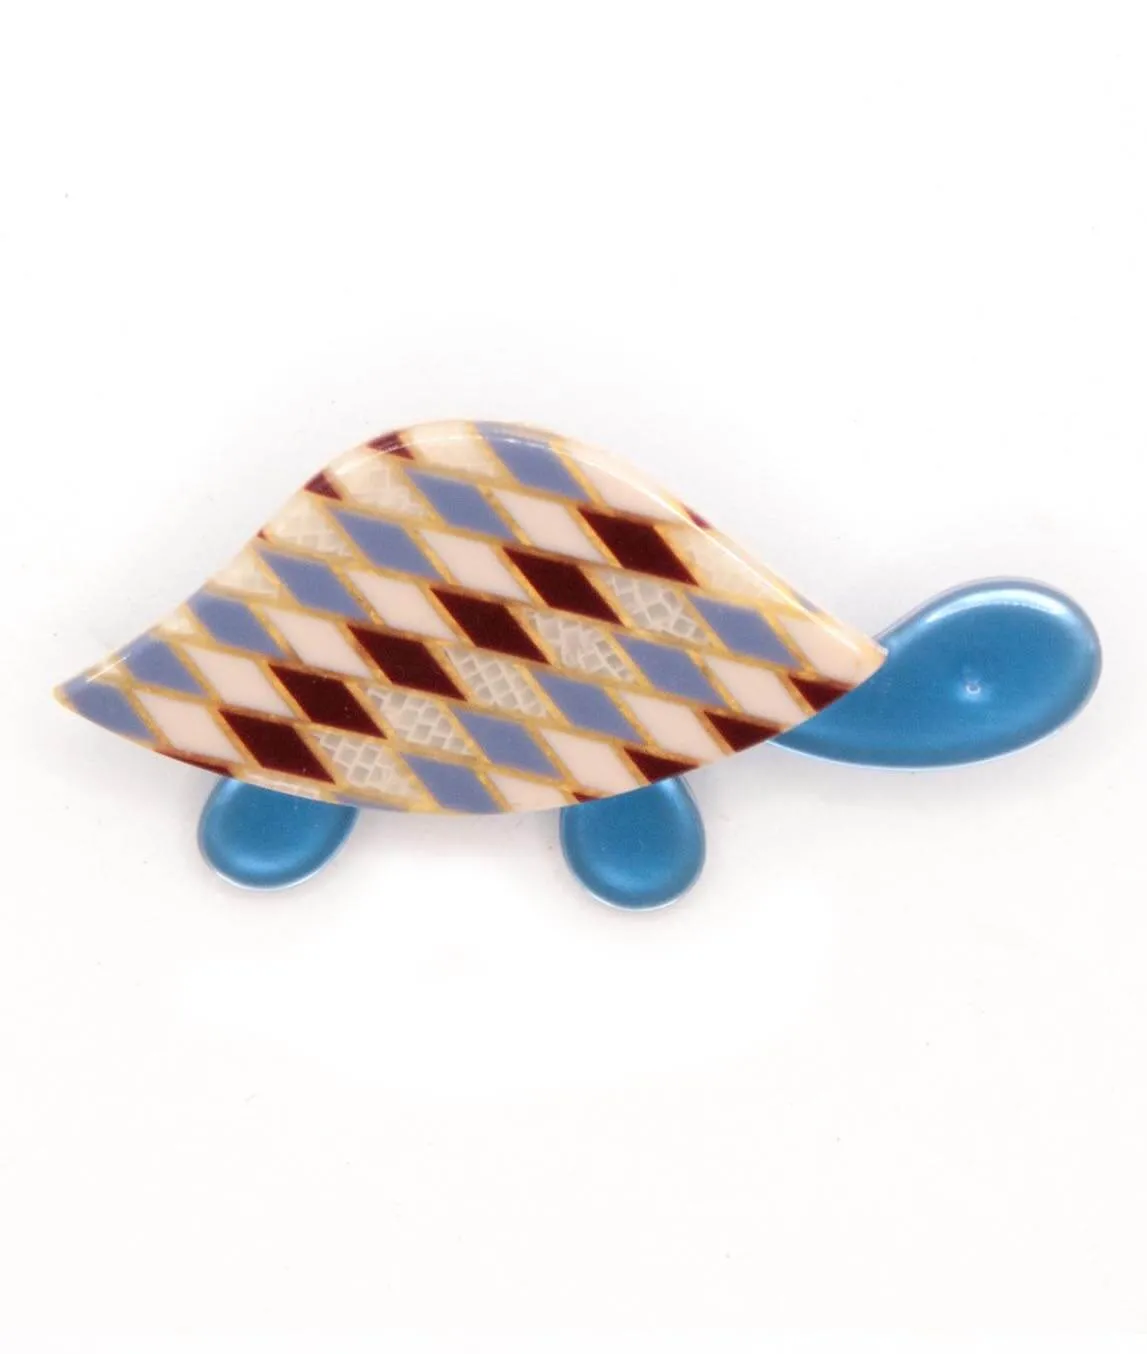 Léa Stein turtle brooch pin blue and pink